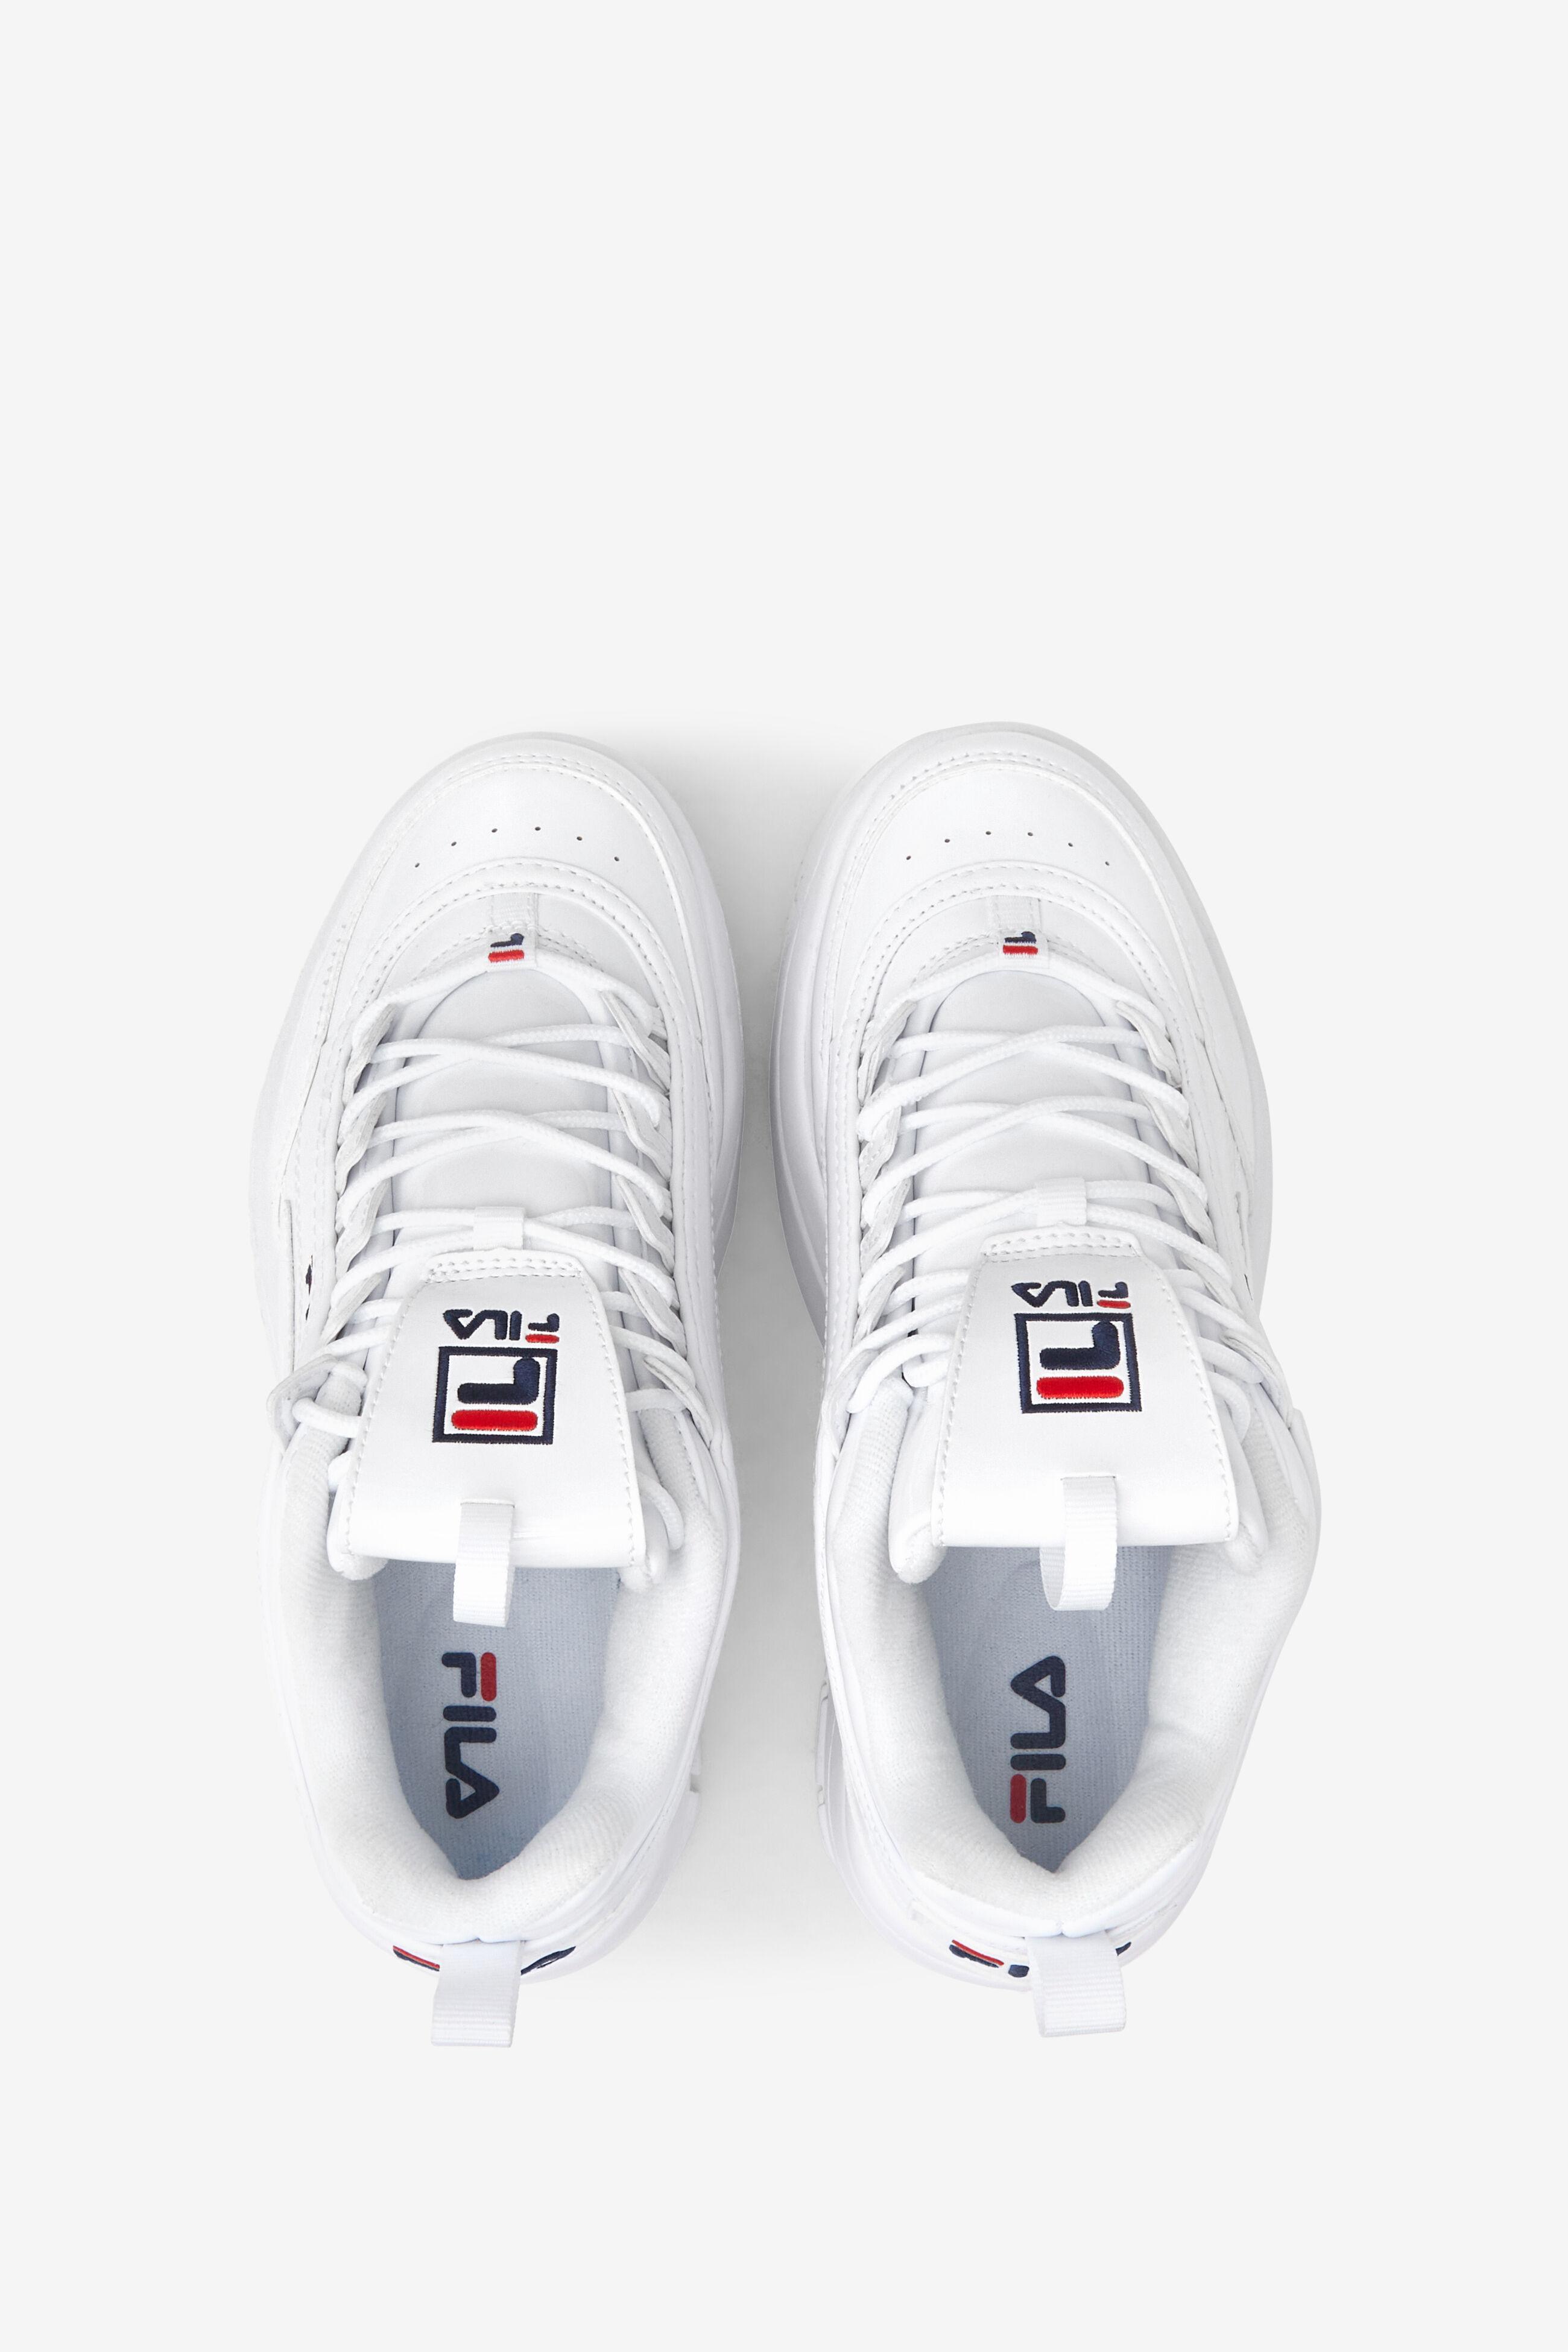 Fila Disruptor 2 Wedge Patent in White | Lyst